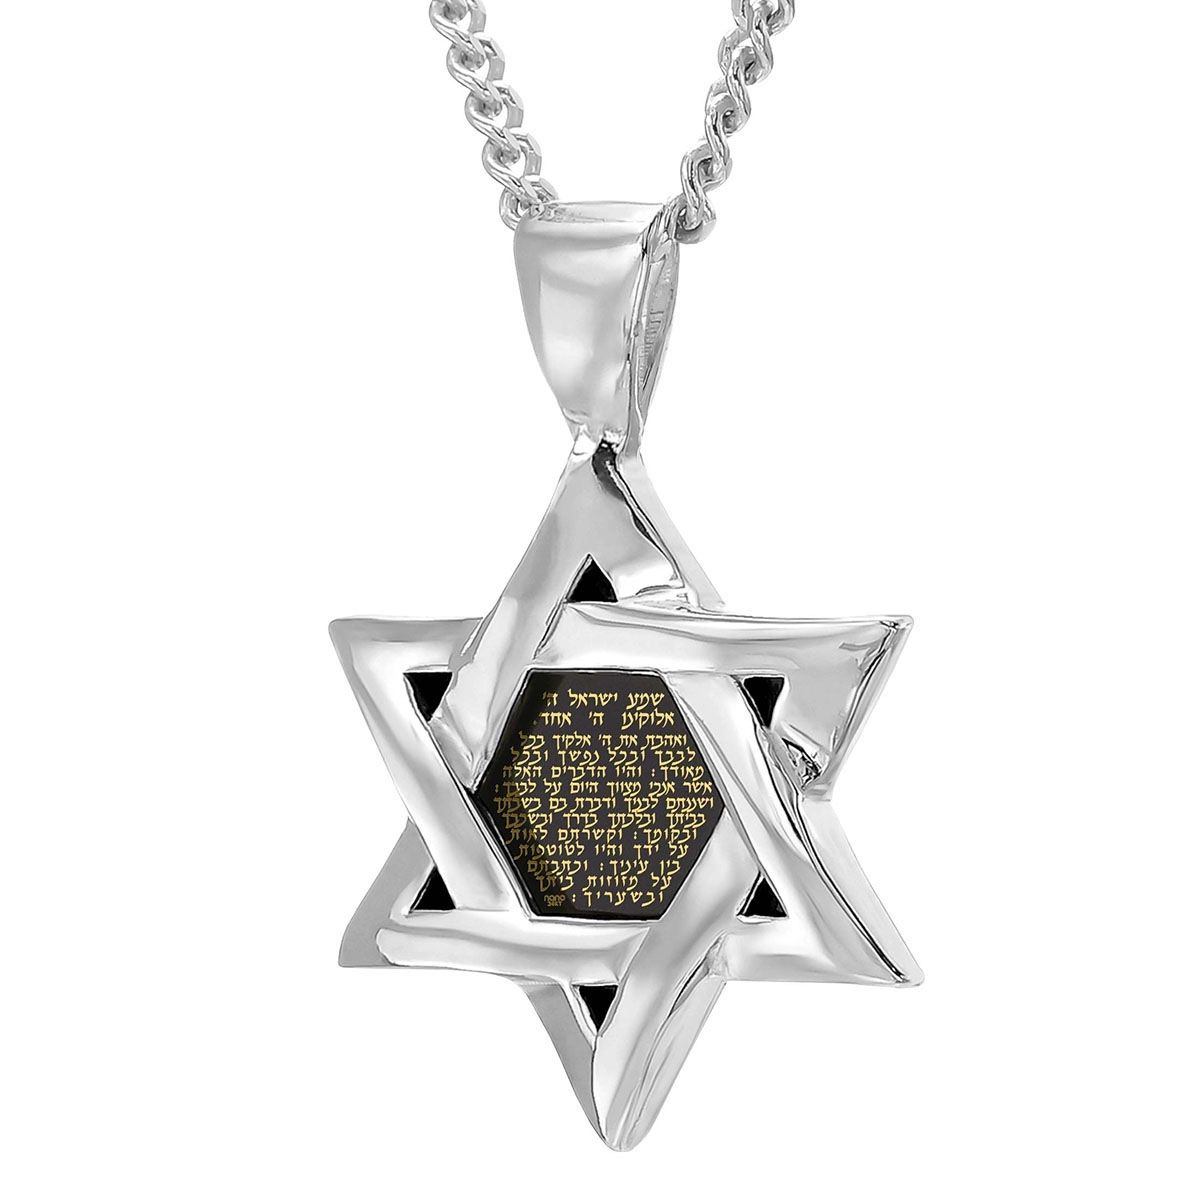 925 Sterling Silver Star of David Shema Yisrael Necklace with Onyx Stone and 24K Gold Inscription - Deuteronomy 6:4-9 - 1